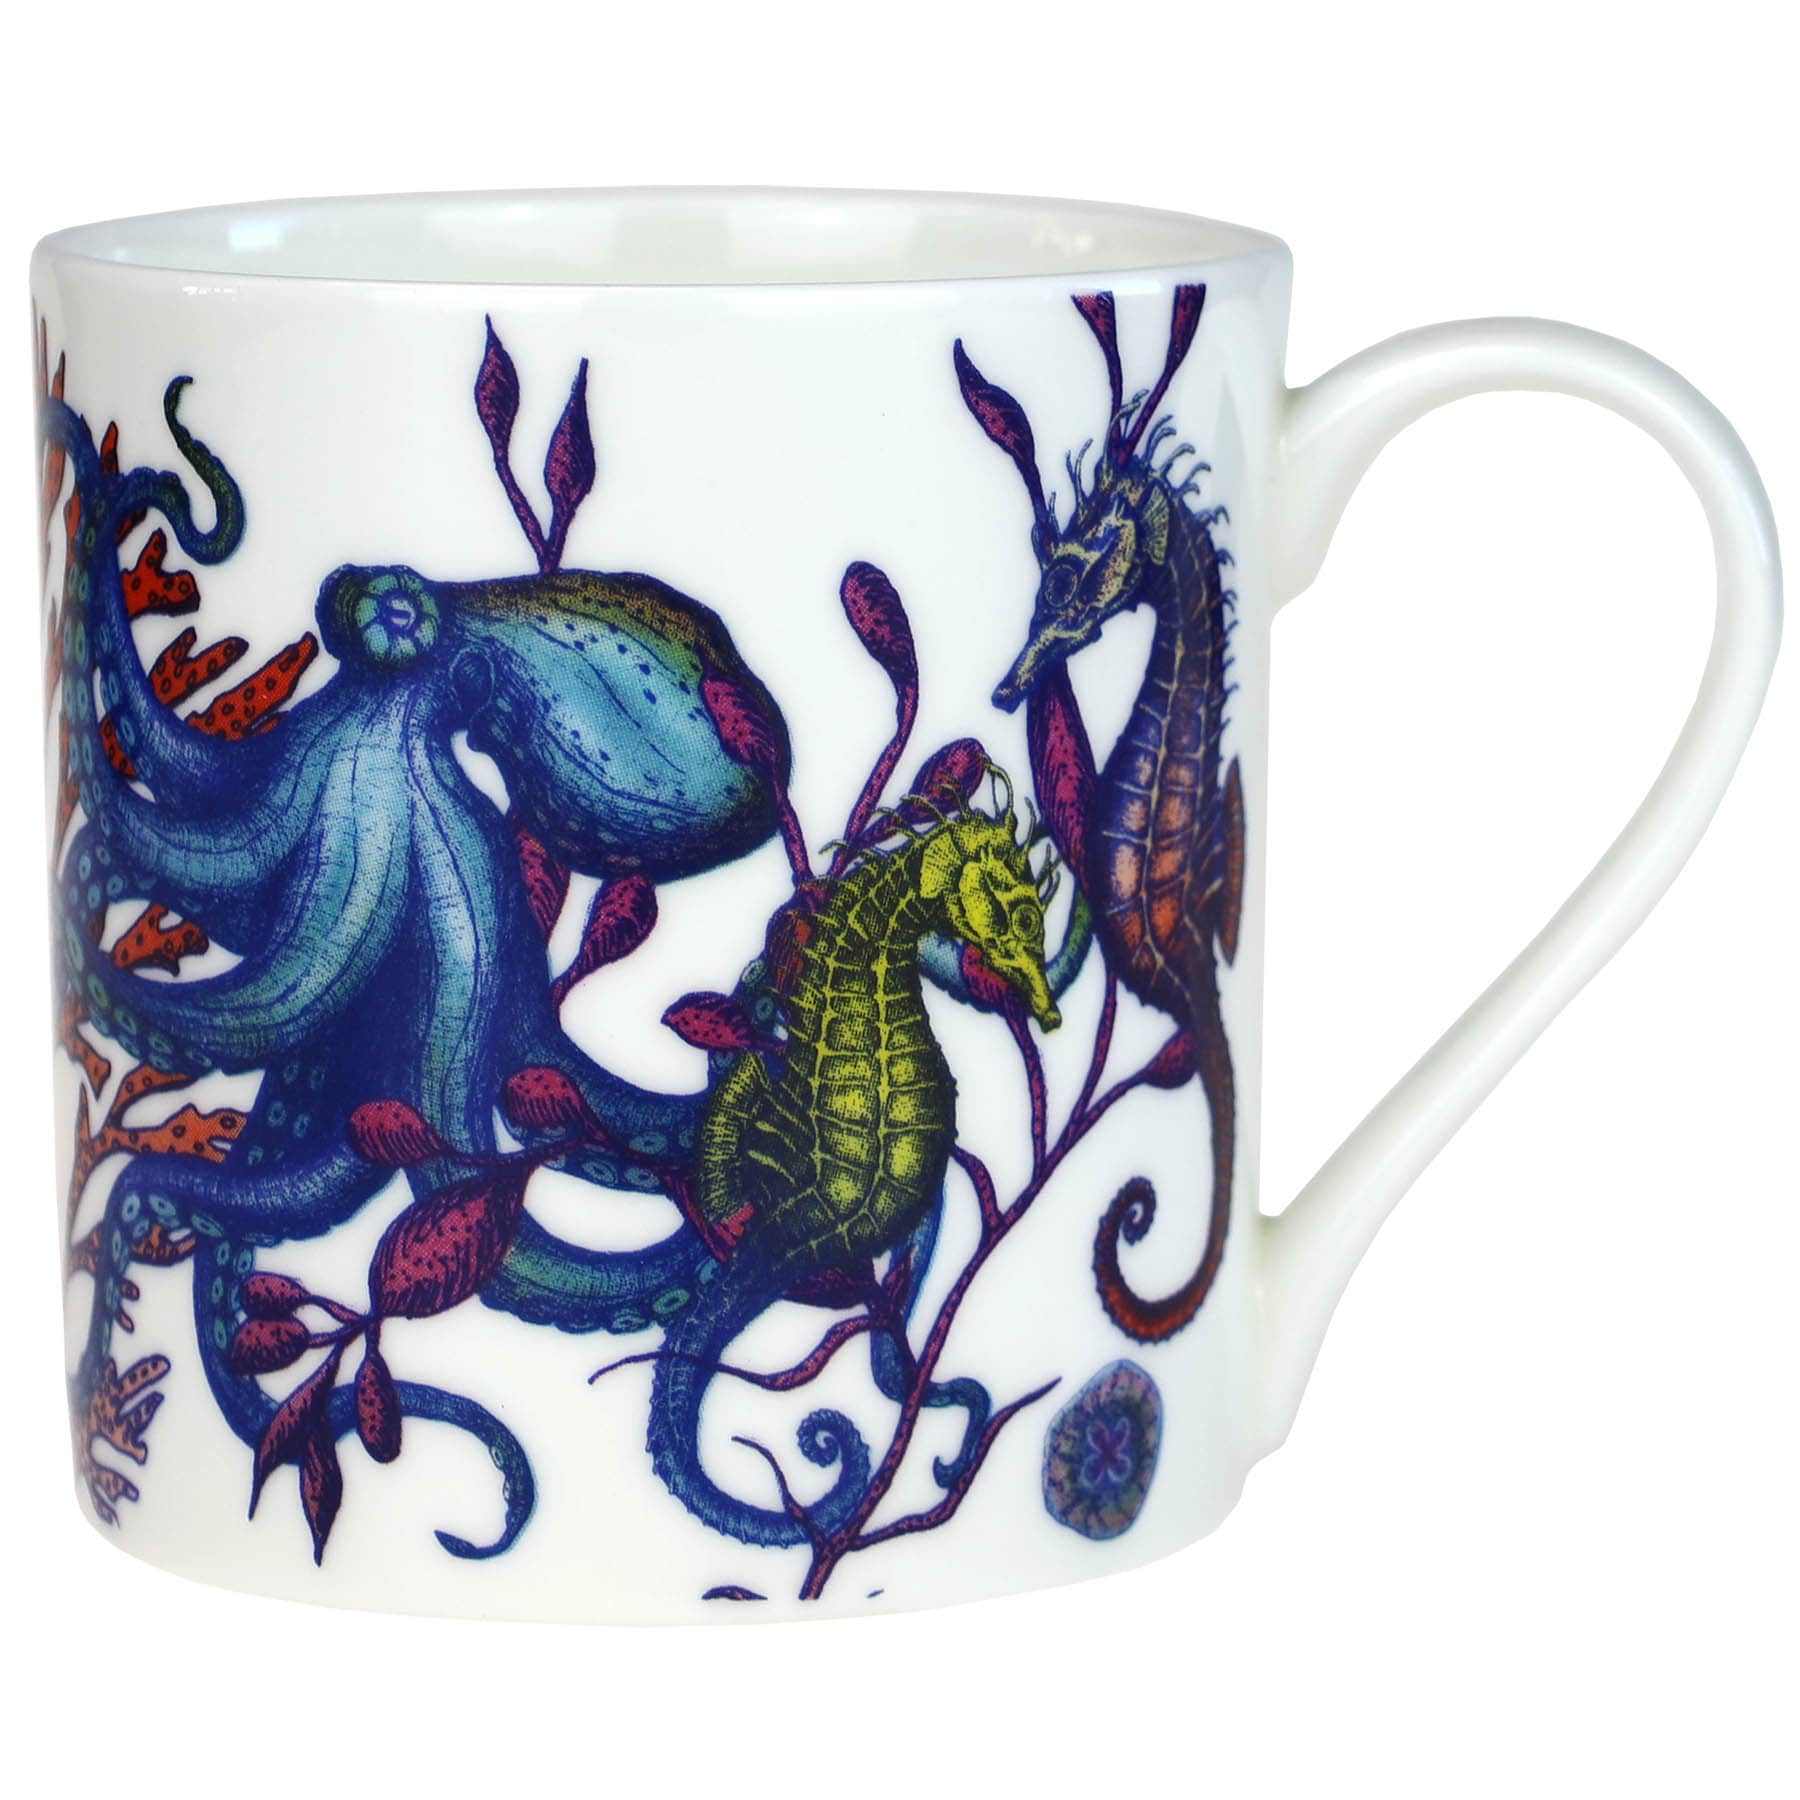 Close up of Image of bone china mug featuring an underwater Reef Design with Octopus, Jellyfish and Starfish .This side shows Octopus and Seahorse